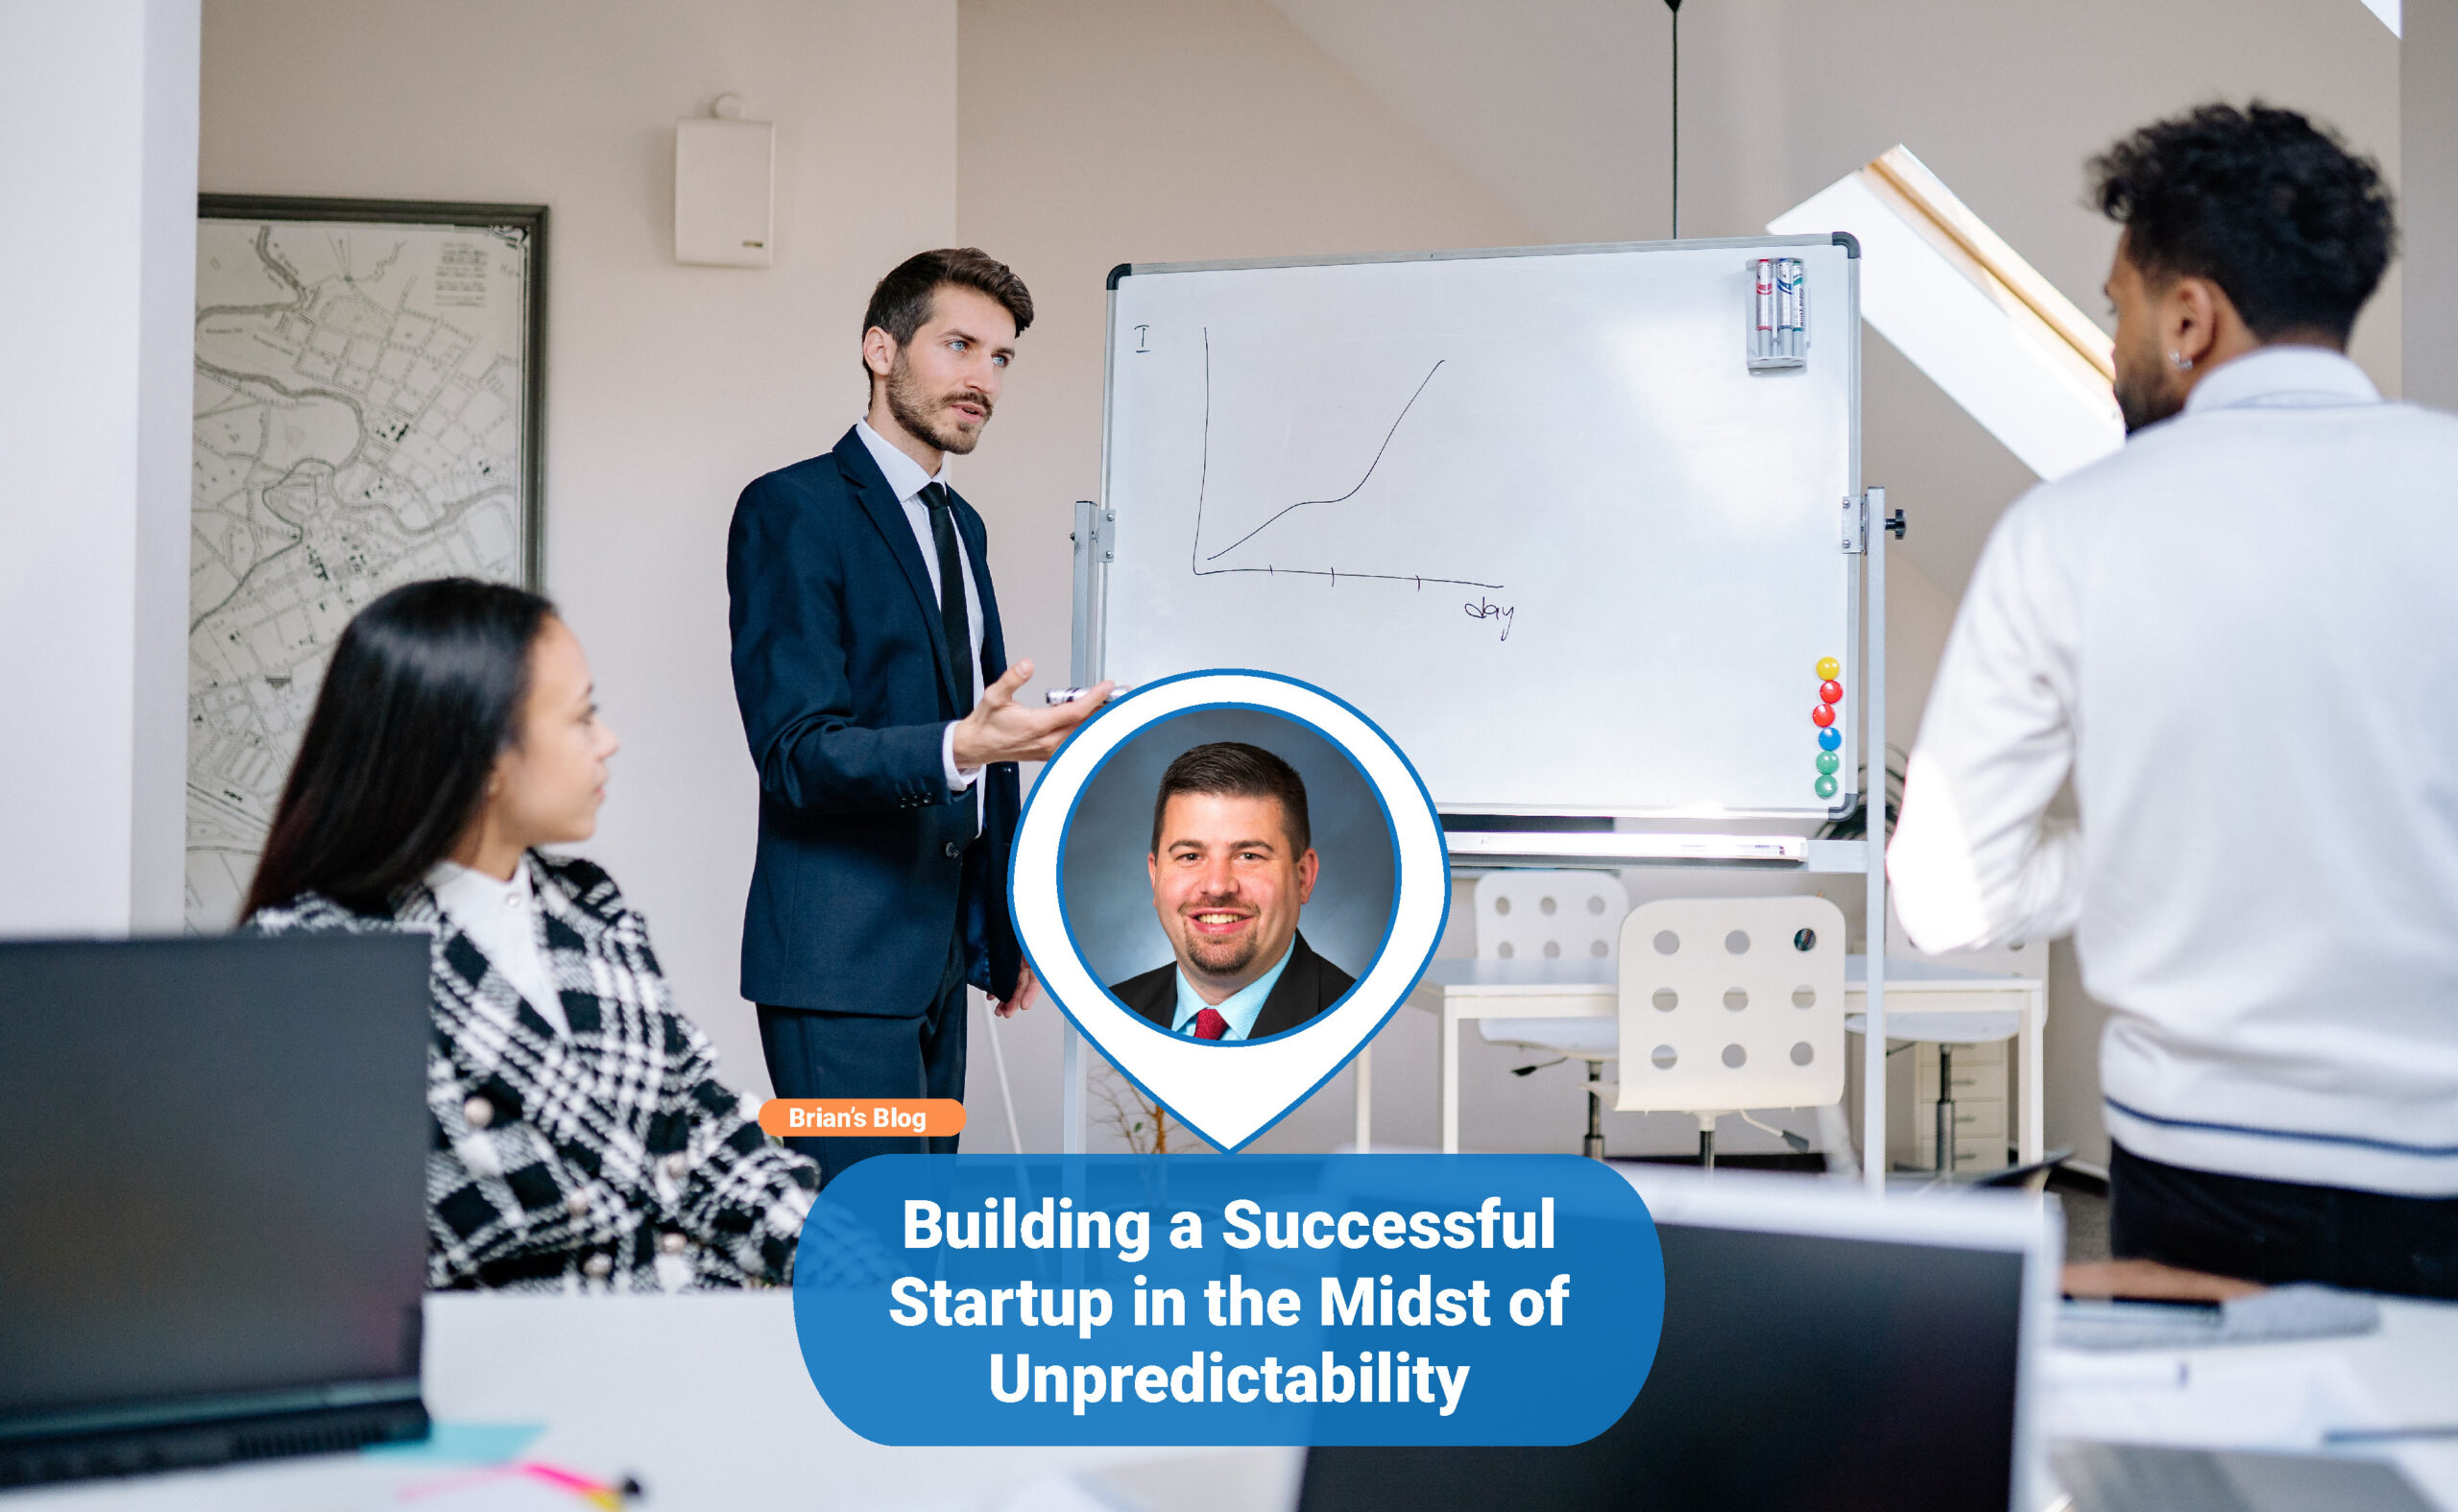 Building a Successful Startup in the Midst of Unpredictability